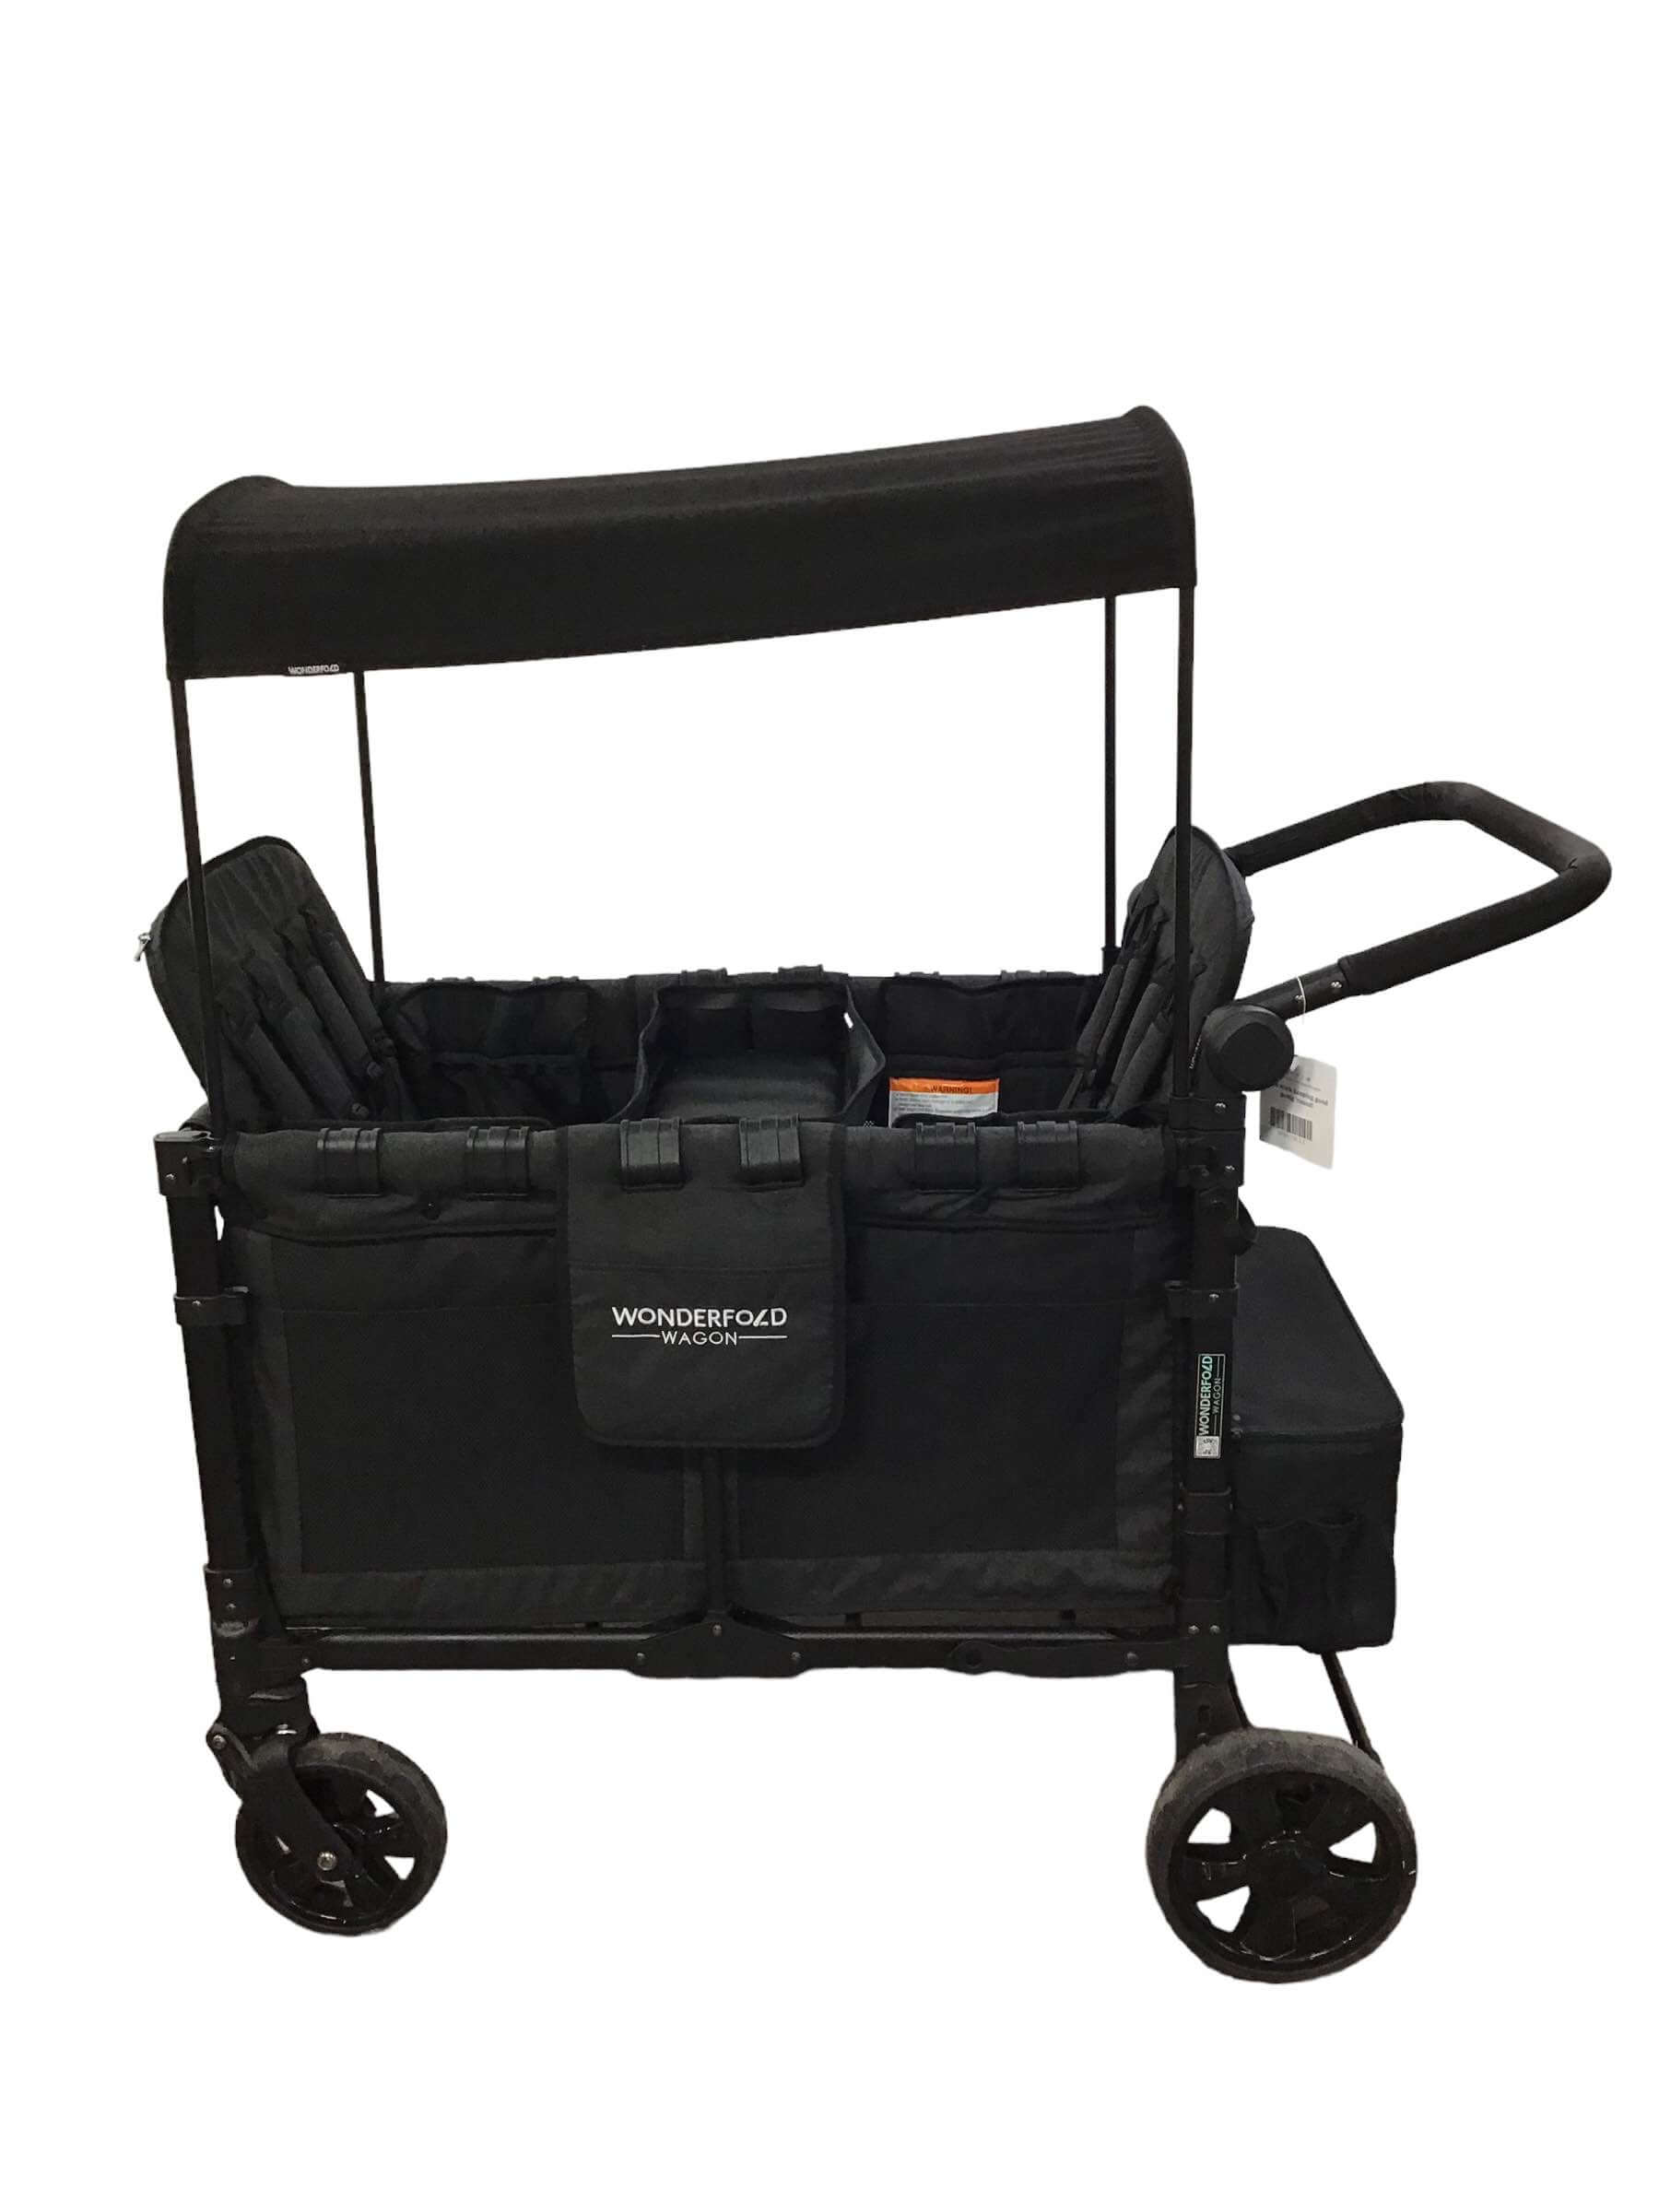 Wonderfold W4 Elite Stroller Wagon, Volcanic Black, 2022, With Double Sided Snack & Activity Tray